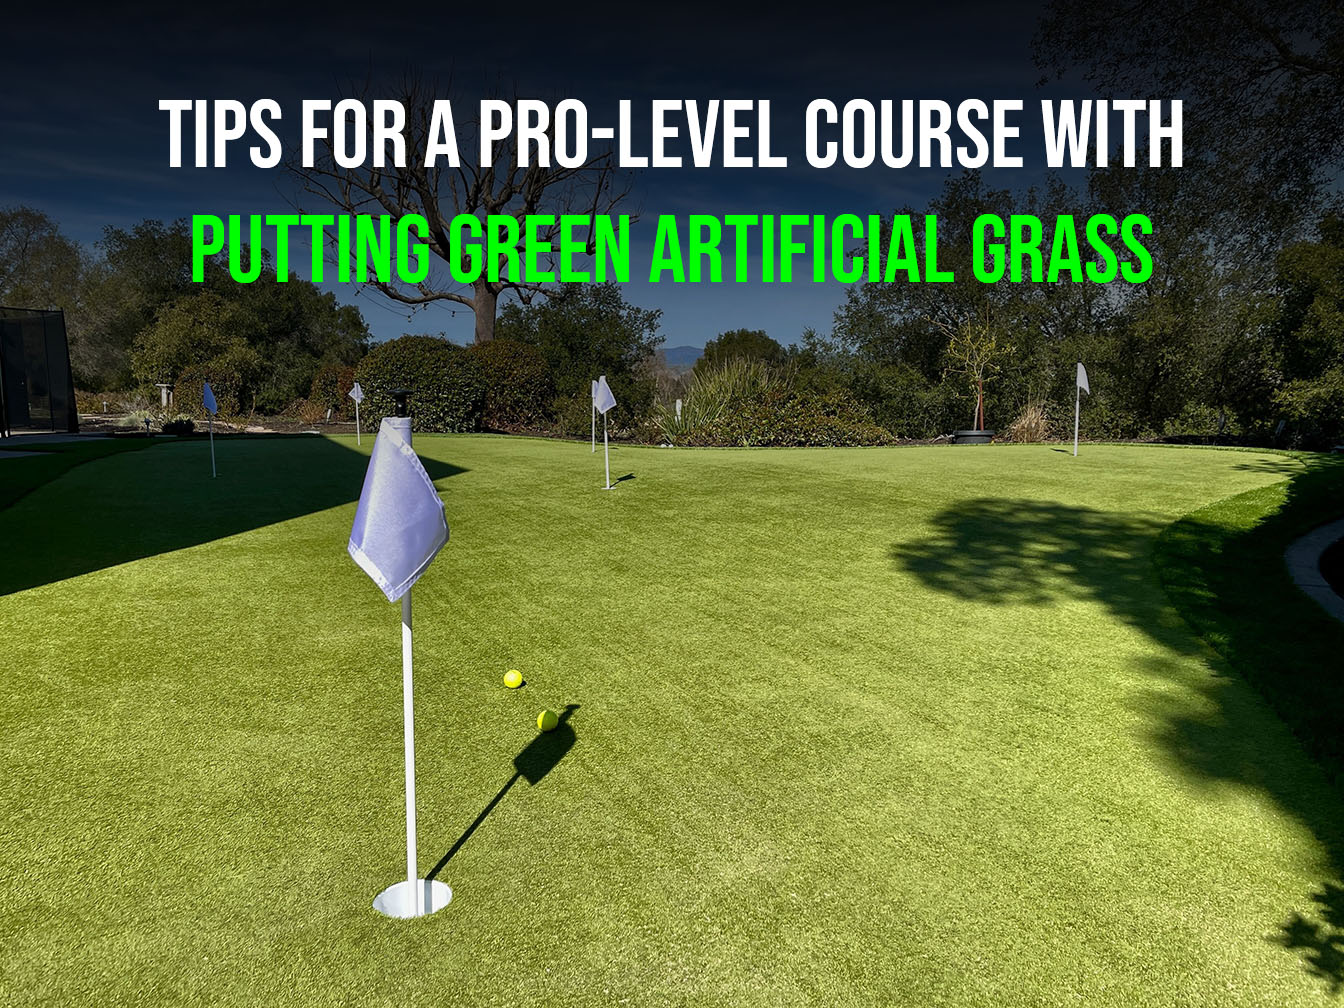 13 Top Tips for Designing a Pro-Grade Putting Green With Artificial Grass